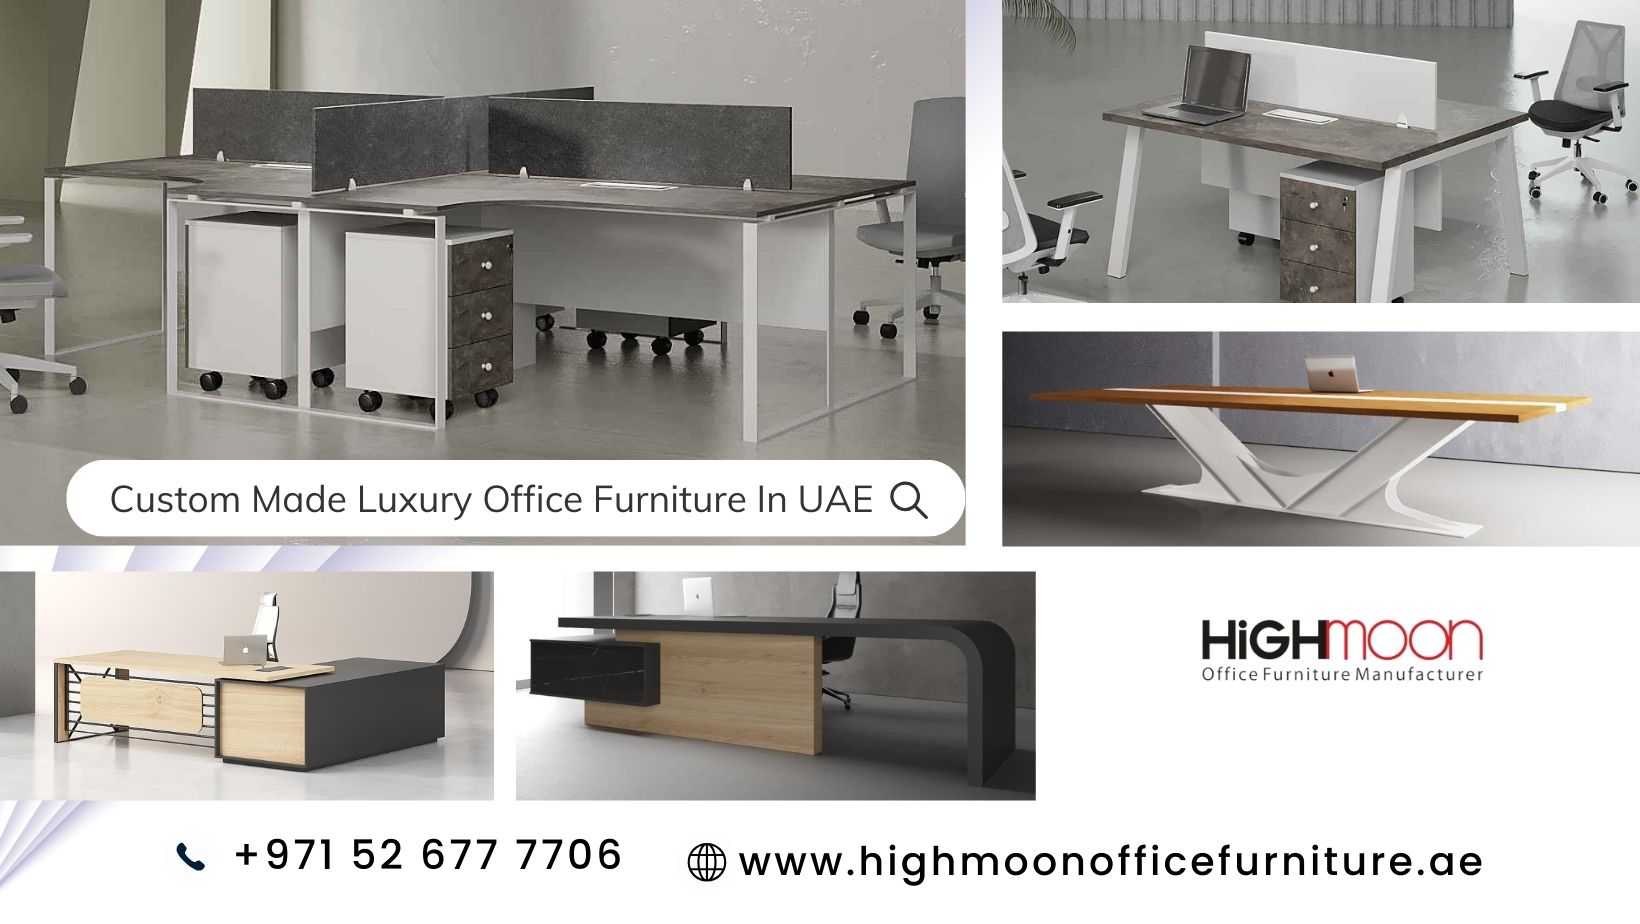 Custom Made Luxury Office Furniture In UAE – Desk, Chairs, Workstations, Conference Table